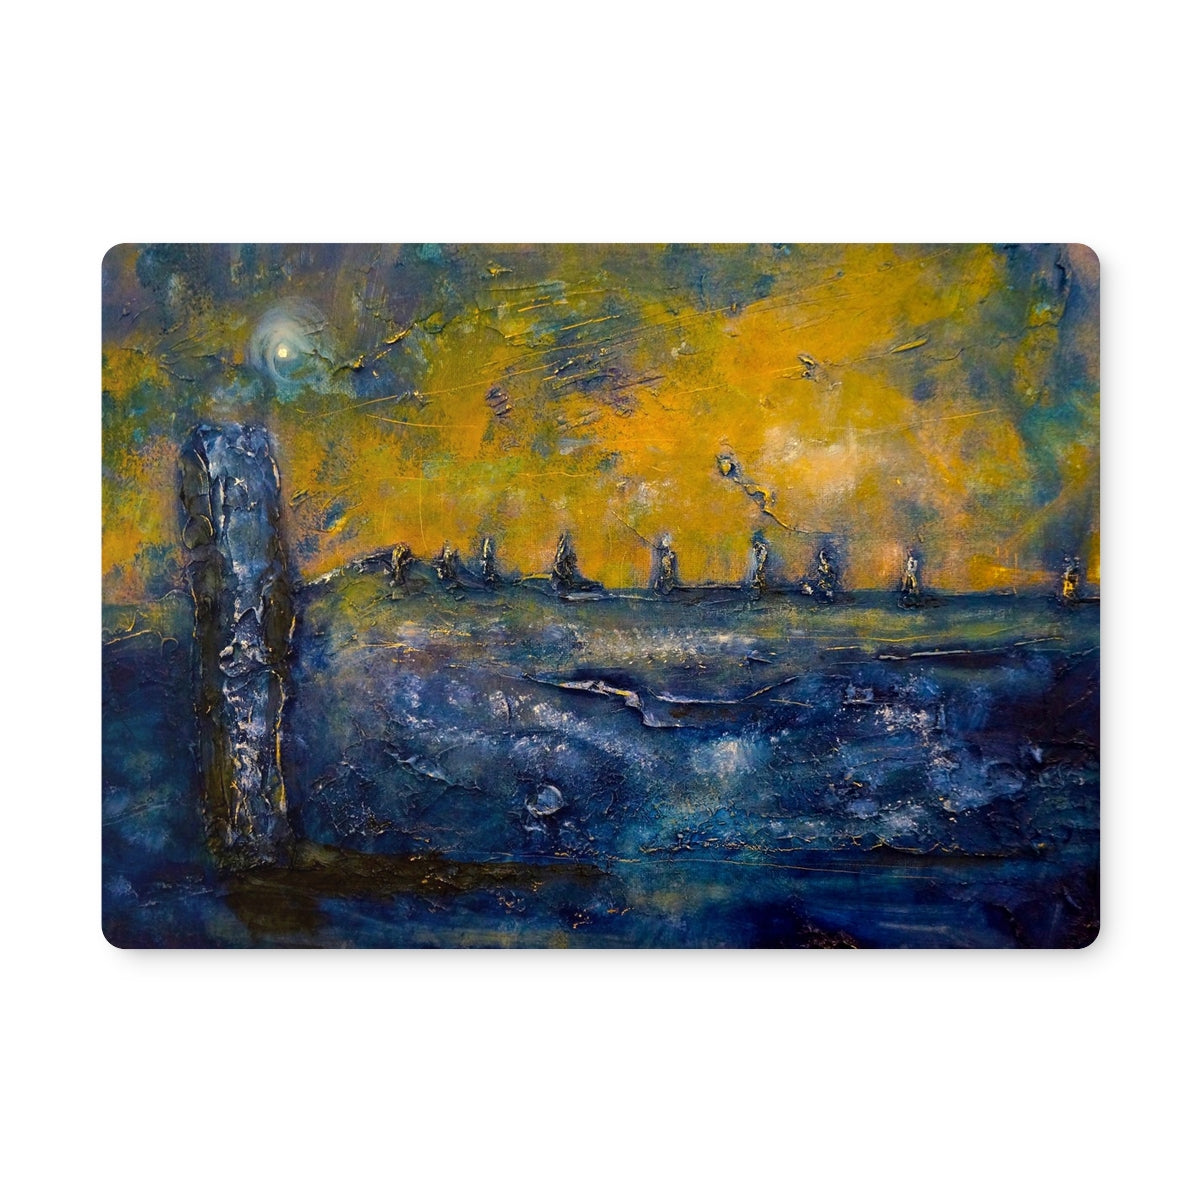 Brodgar Moonlight Orkney Art Gifts Placemat-Placemats-Orkney Art Gallery-4 Placemats-Paintings, Prints, Homeware, Art Gifts From Scotland By Scottish Artist Kevin Hunter